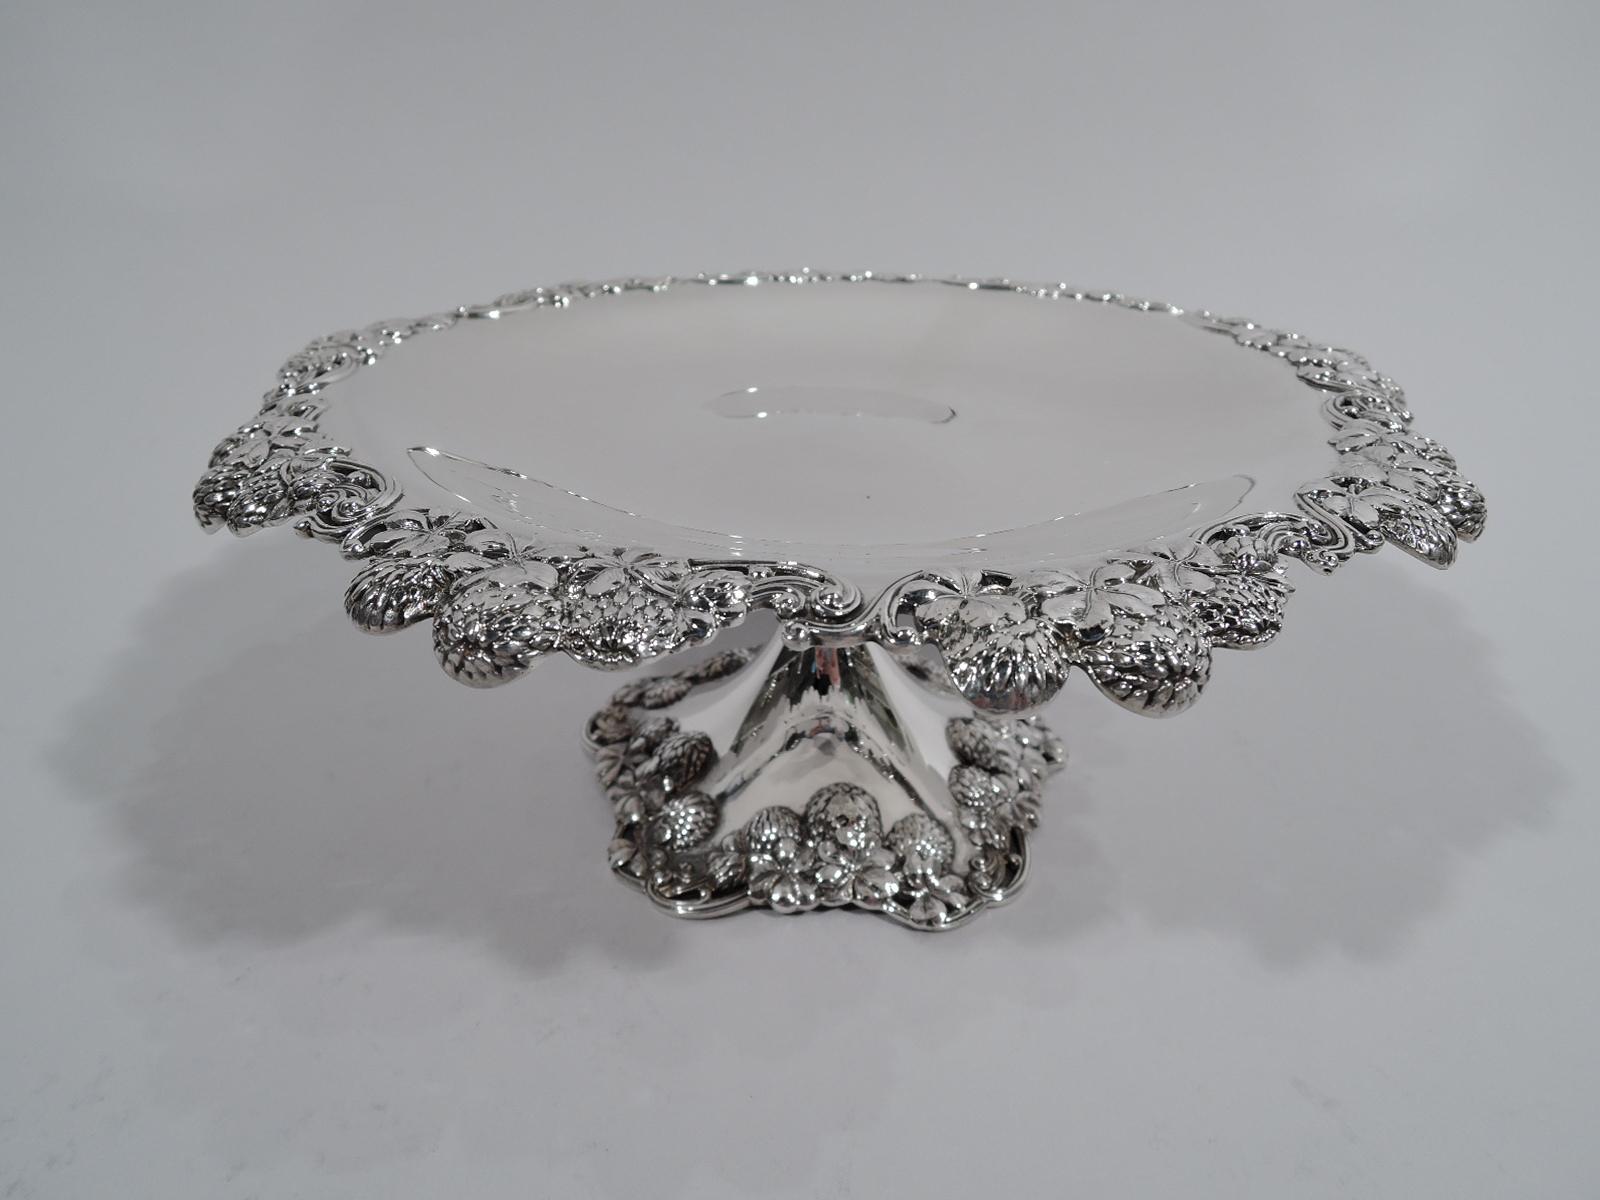 Pair of Clover sterling silver compotes. Made by Tiffany & Co. in New York. Plain and shallow bowl. Rim irregular and pierced with pell-mell flower heads. Raised foot same. Great pieces in the Classic high-low pattern that combines wildflowers and